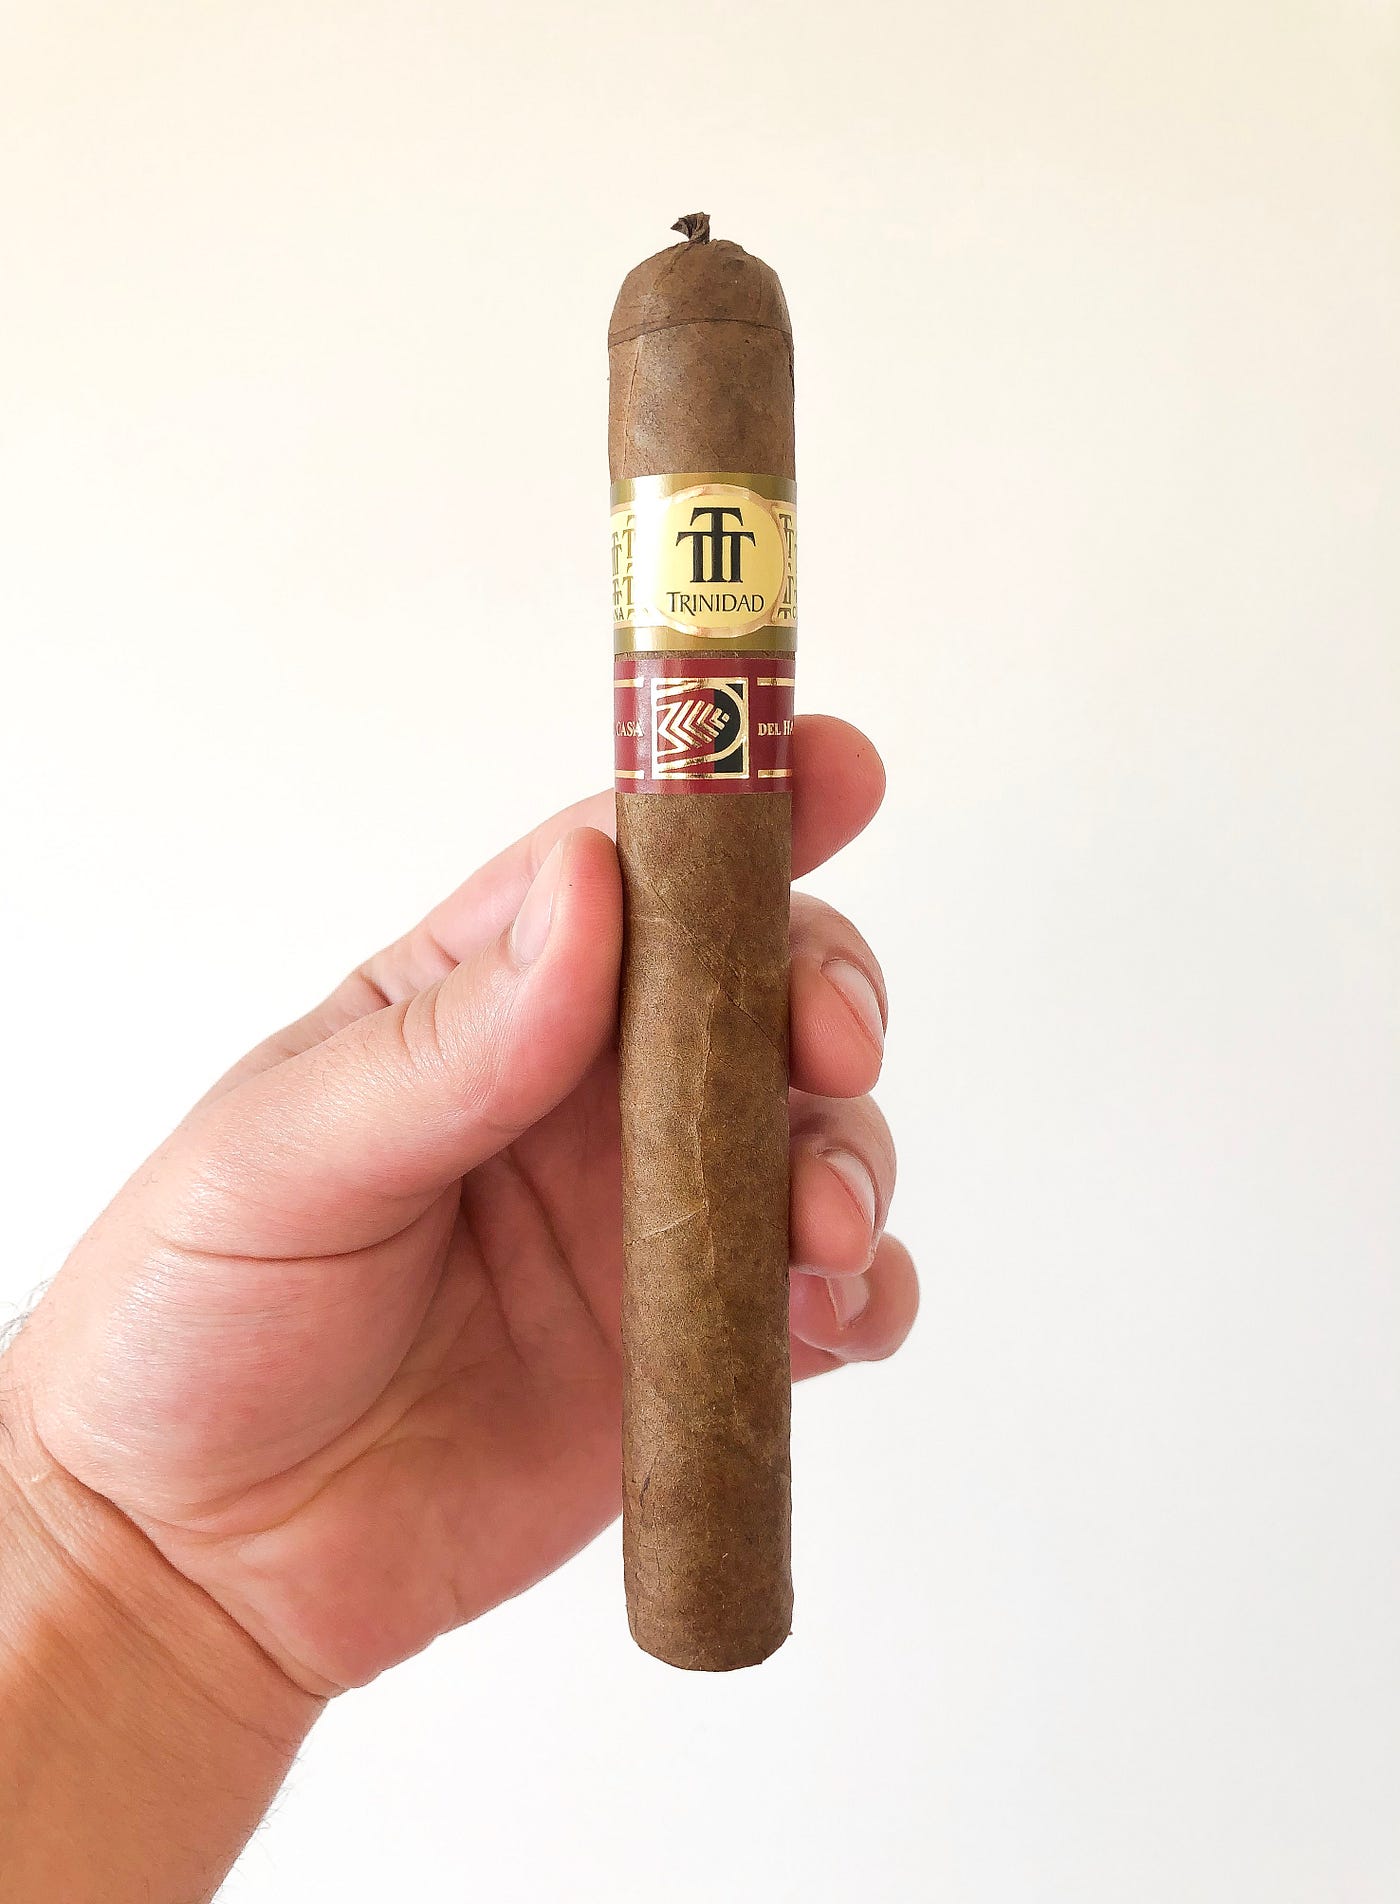 Top 15 Cuban Cigars to have on your humidor.